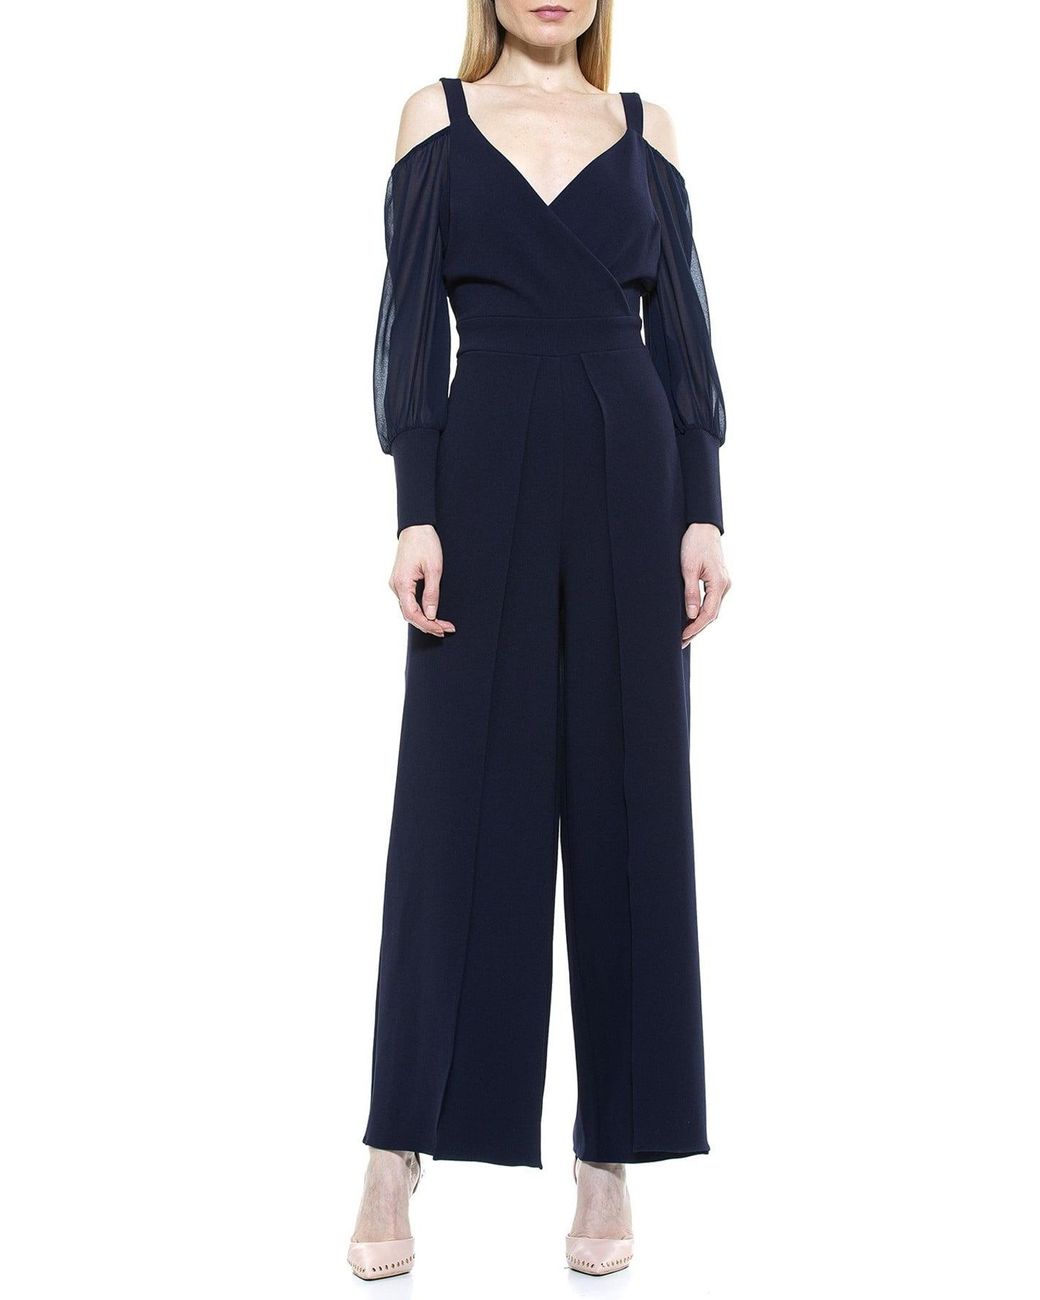 Alexia Admor Kayleigh Cold Shoulder Surplice Jumpsuit in Navy (Blue) - Lyst